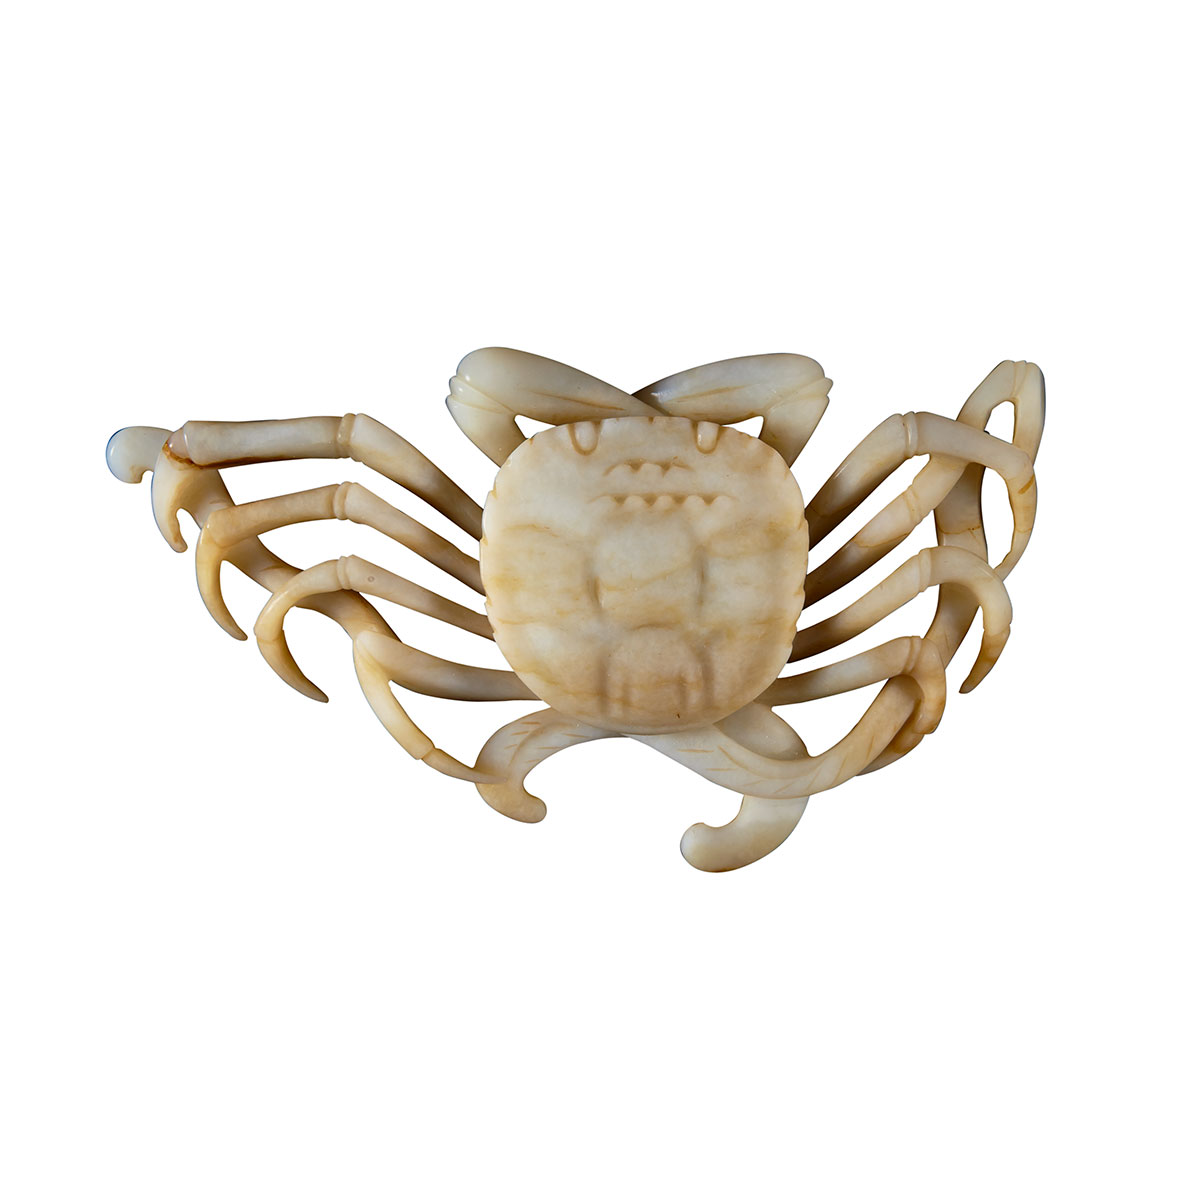 Mottled White Jade Carving of a Crab